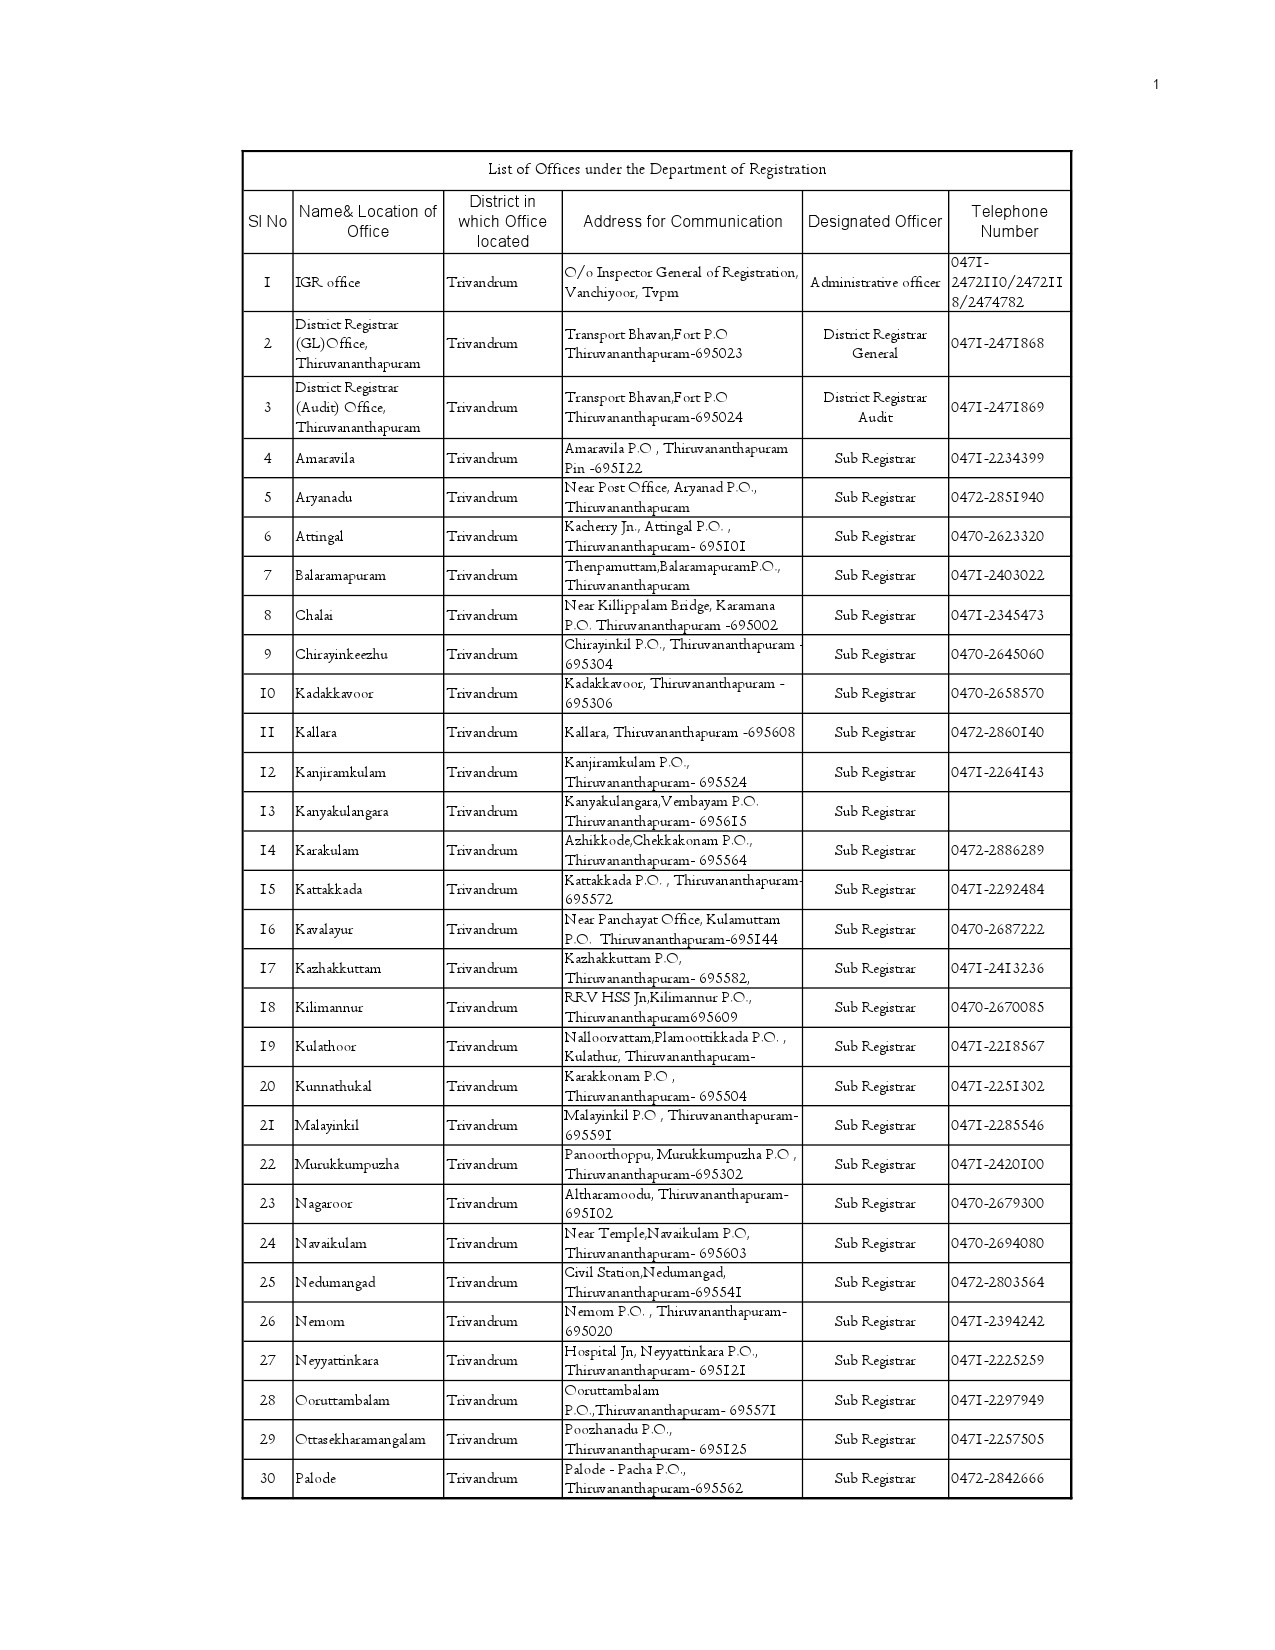 List of Offices in Kerala under the Department of Registration - Notification Image 1